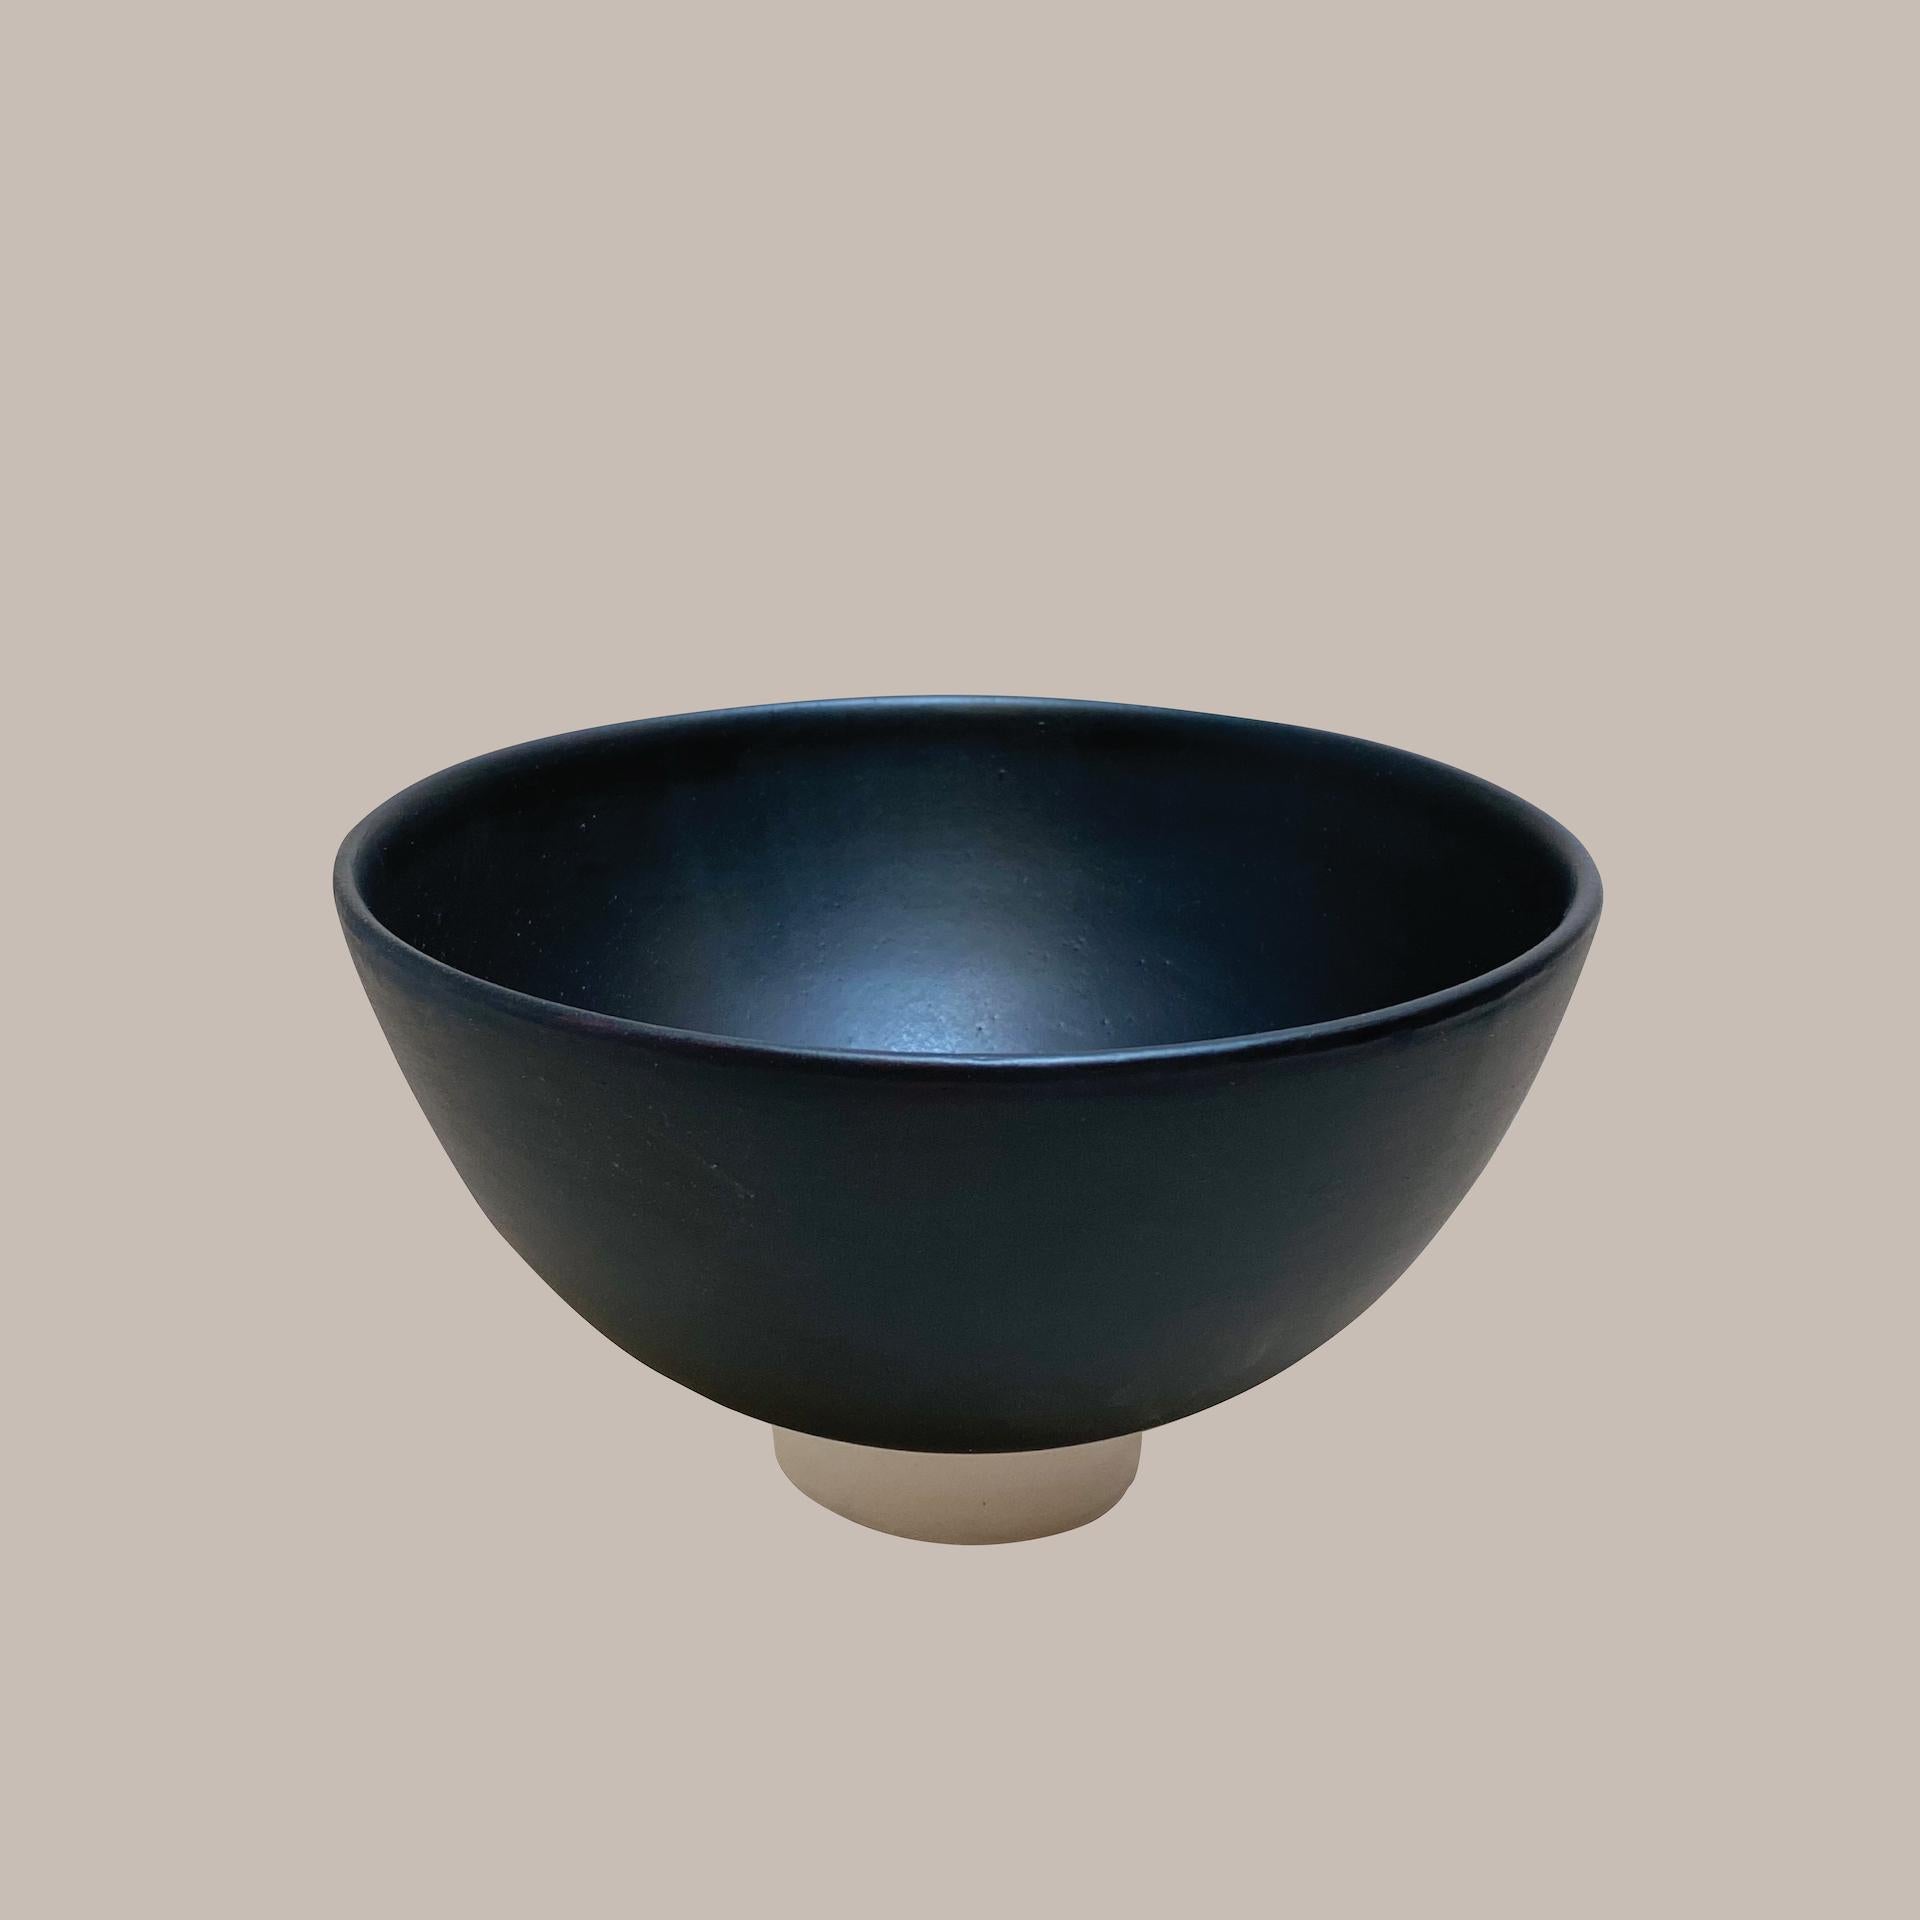 Ott Another Paradigmatic Handmade Ceramic Bowl by Studio Yoon Seok-Hyeon In New Condition For Sale In Geneve, CH